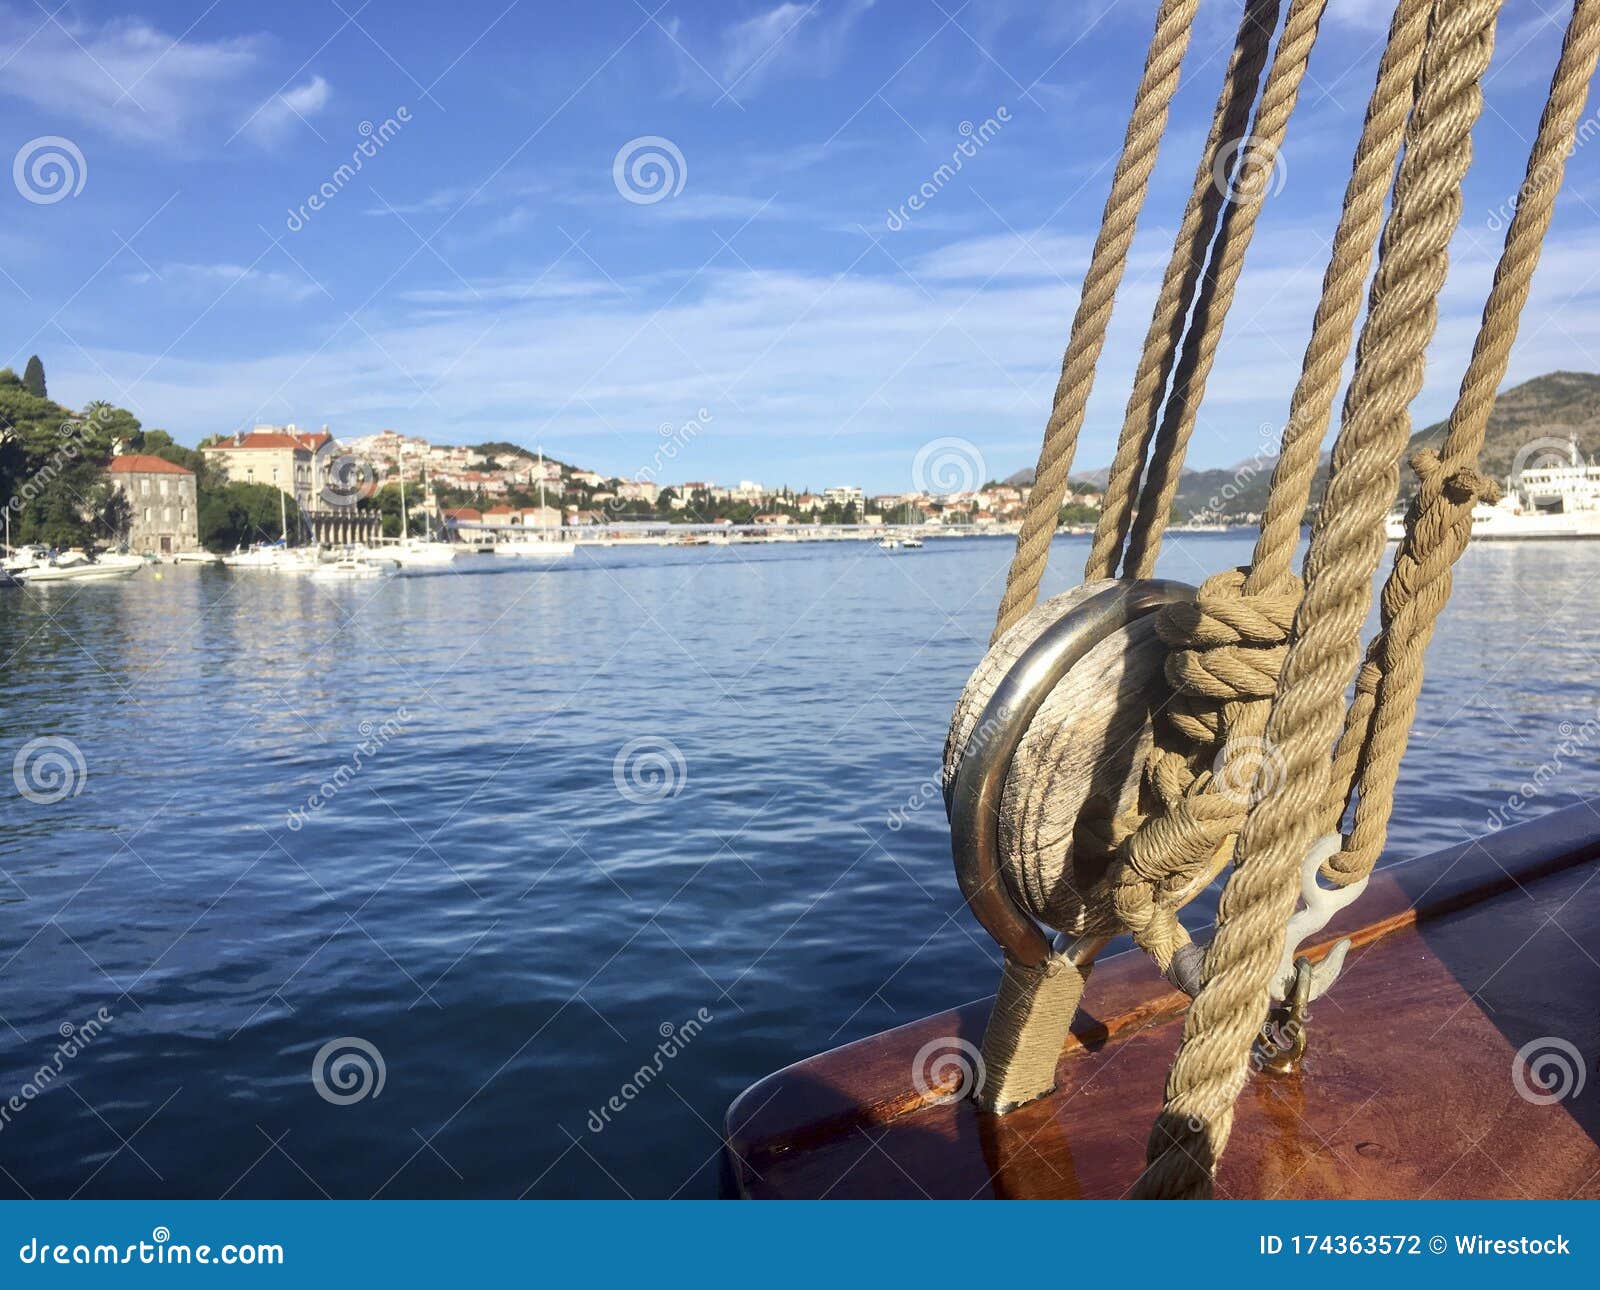 wide angle shot from an old sailboat winch and ropes in port gruÃÂ¾, dubrovnik, croatia